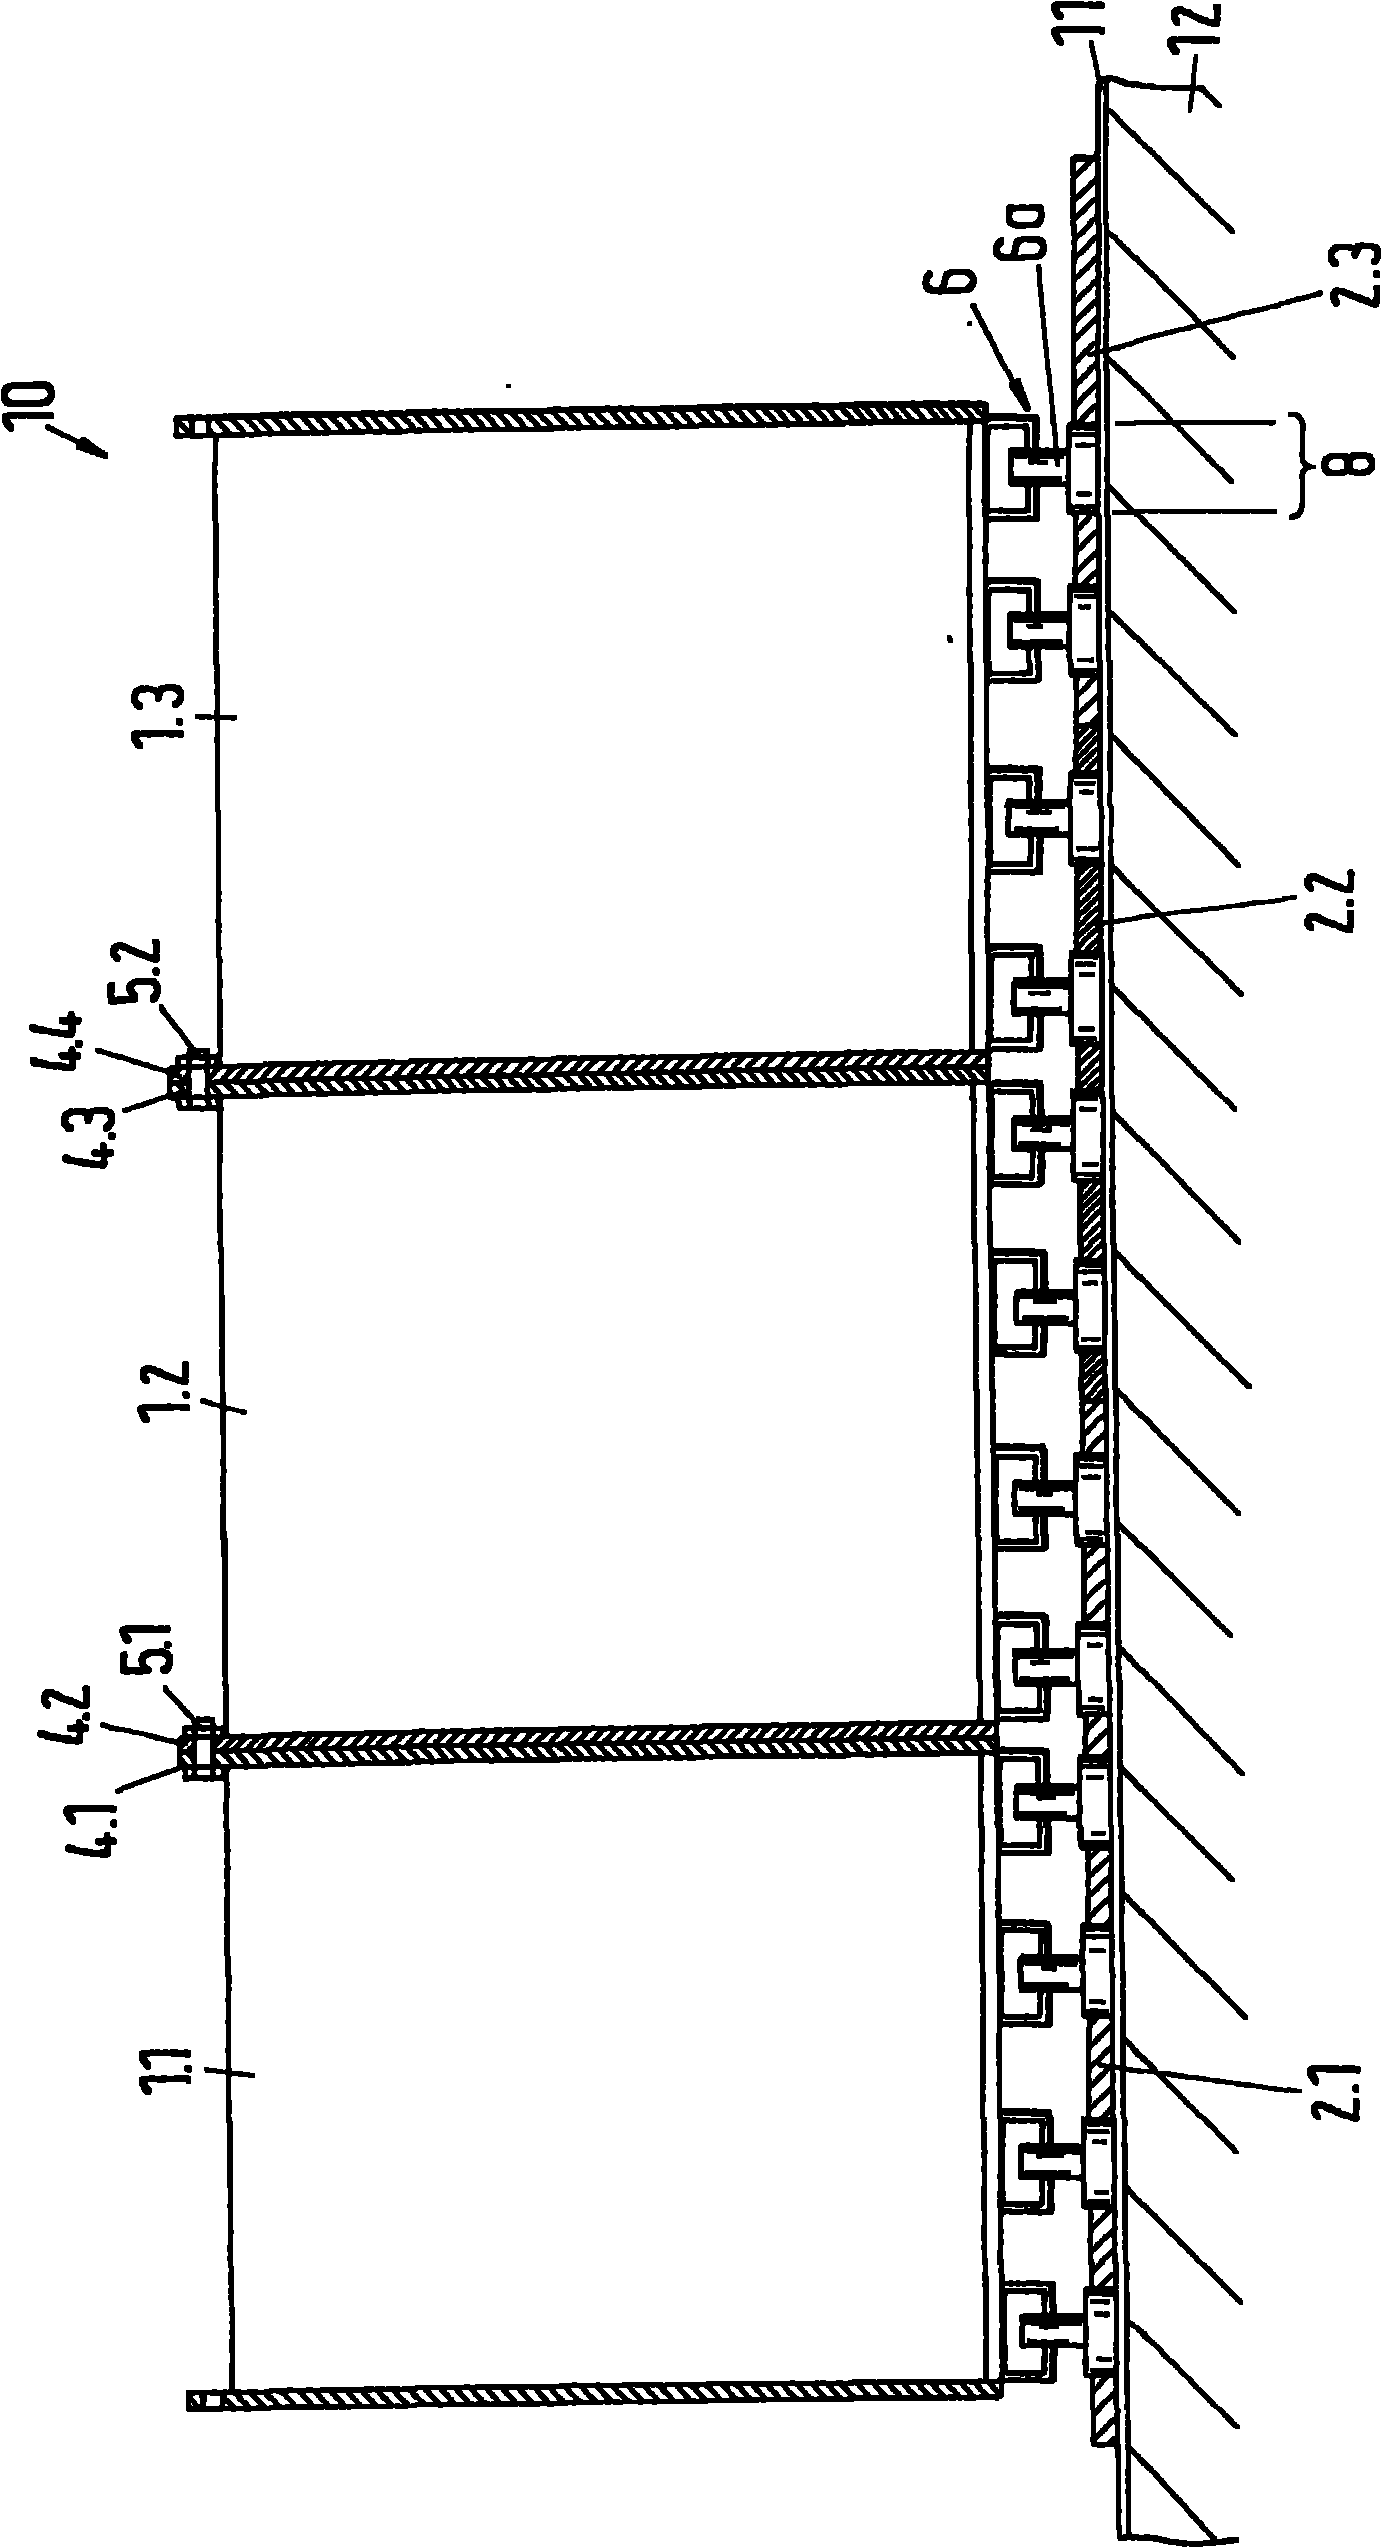 Storage rack arrangement for the storage of nuclear fuel elements